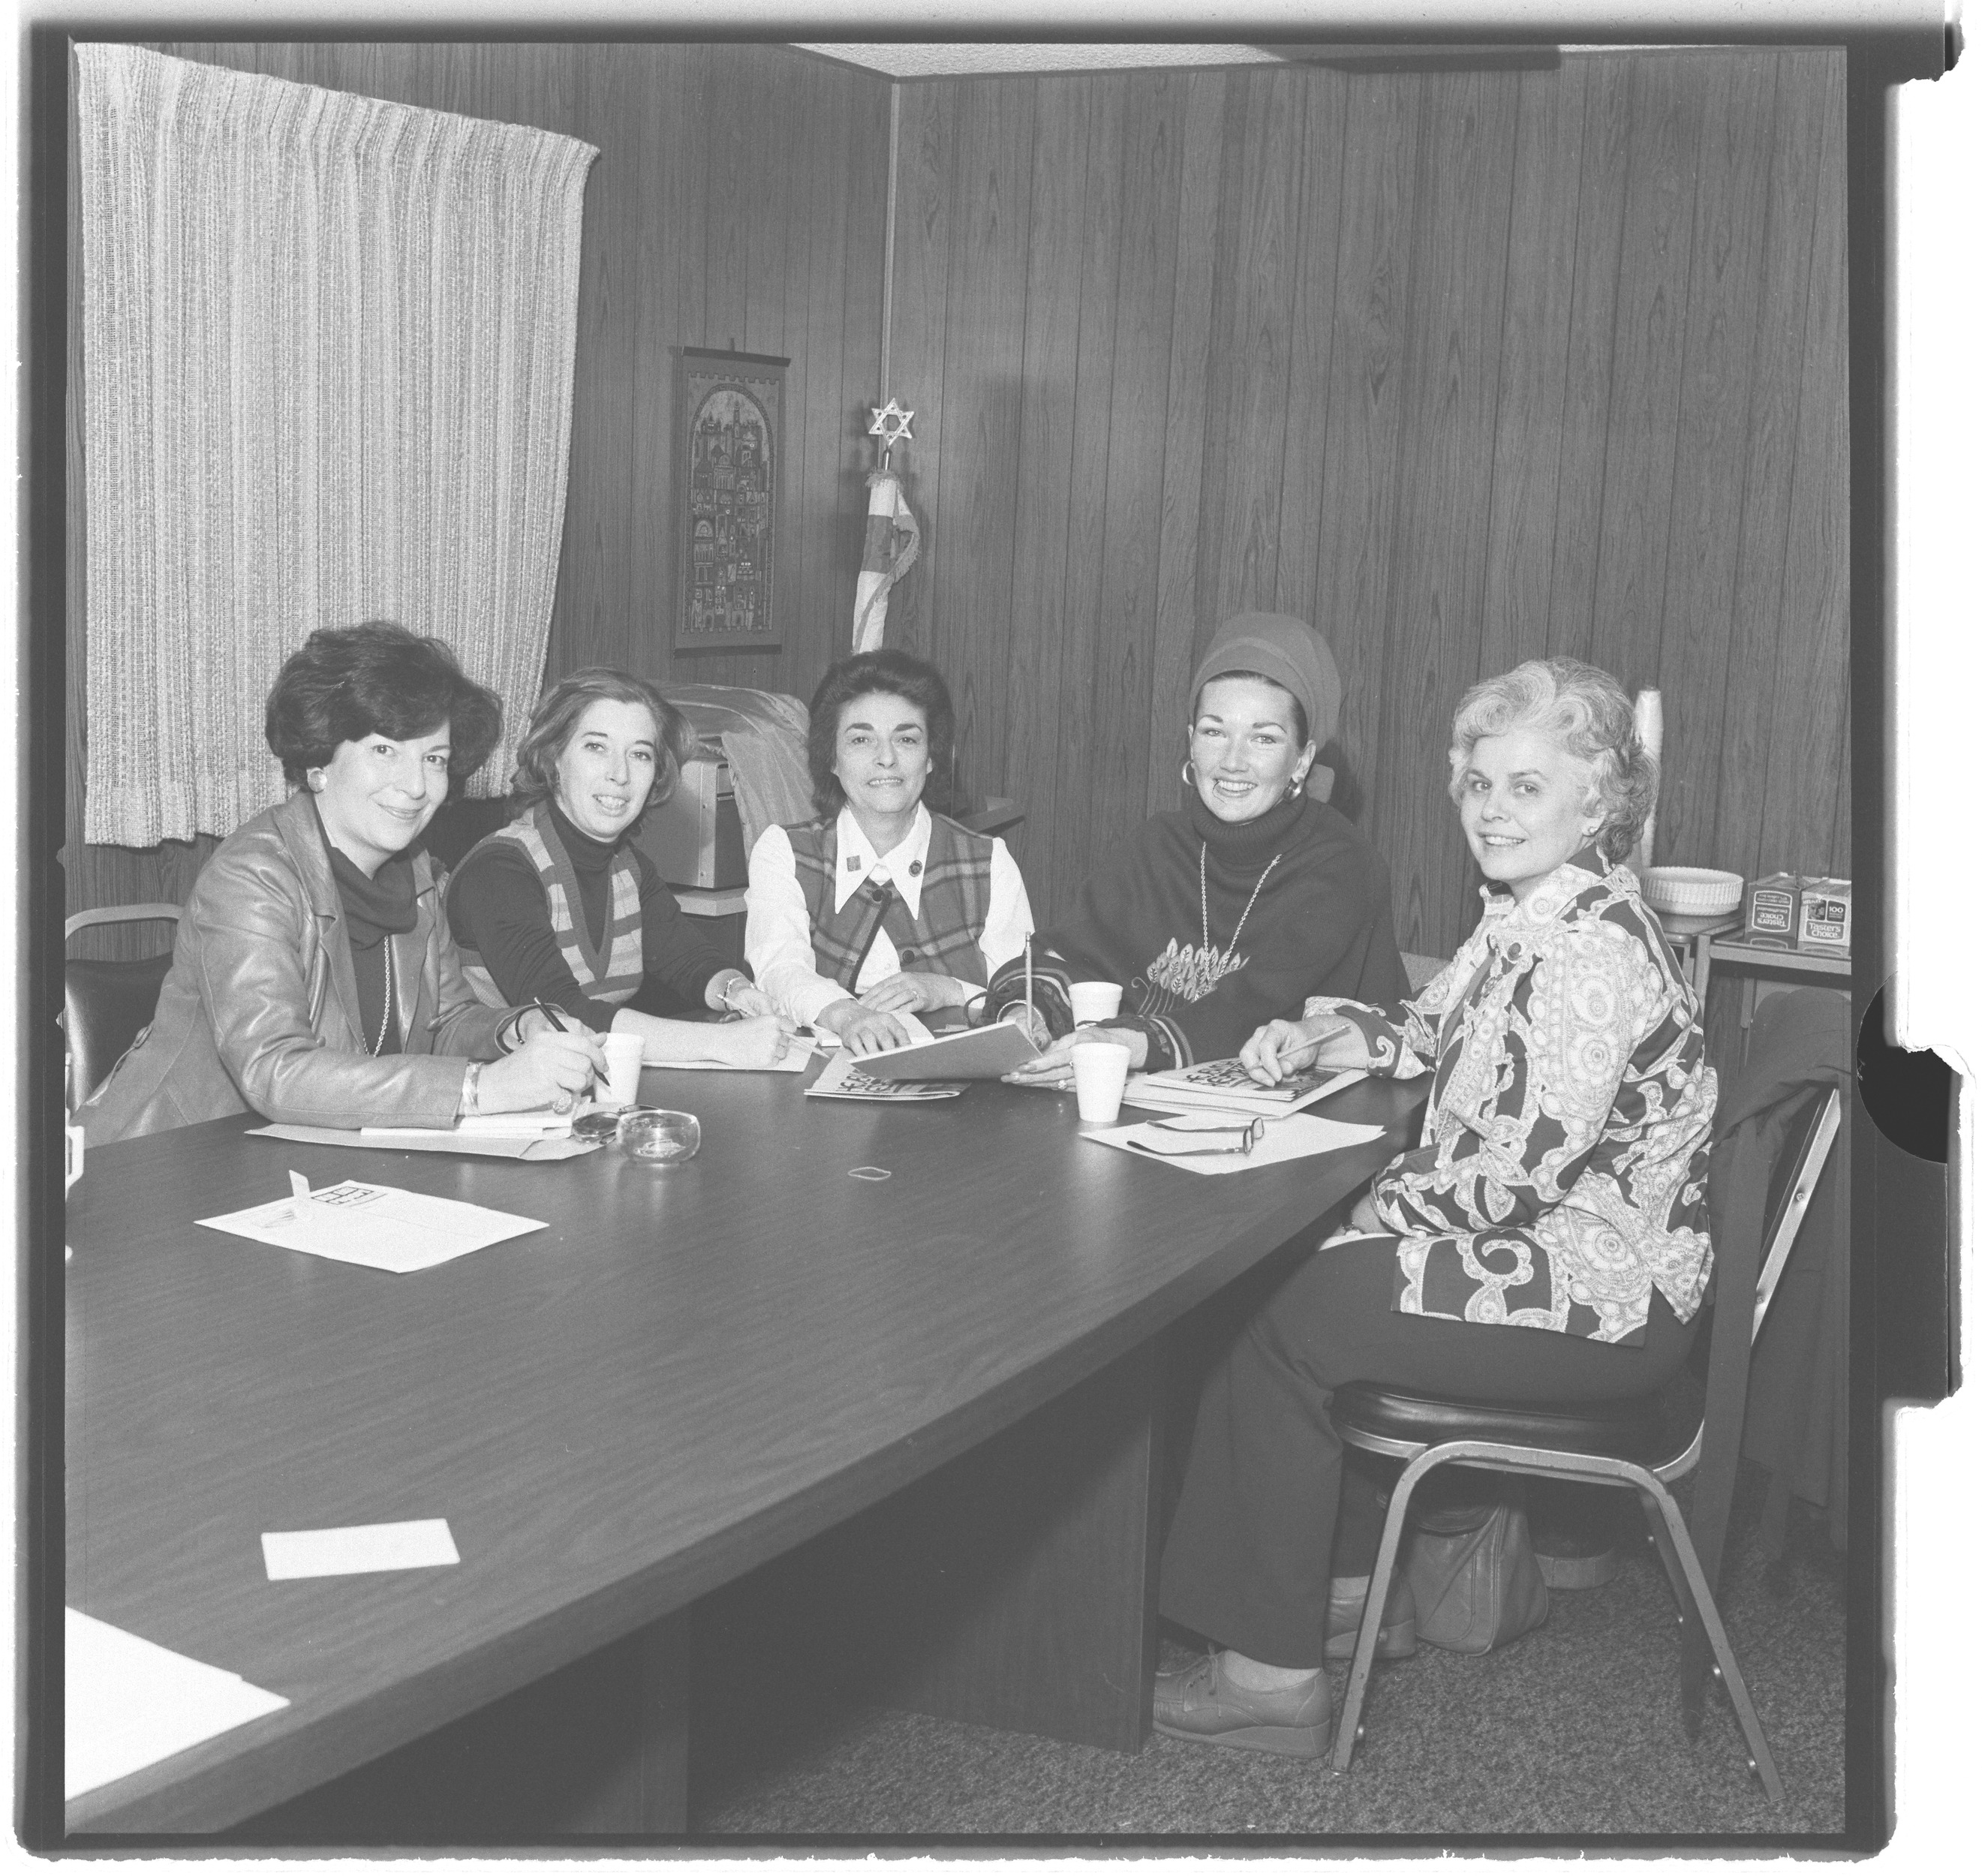 Photographs of Combined Jewish Appeal Publicity in Office, image 02